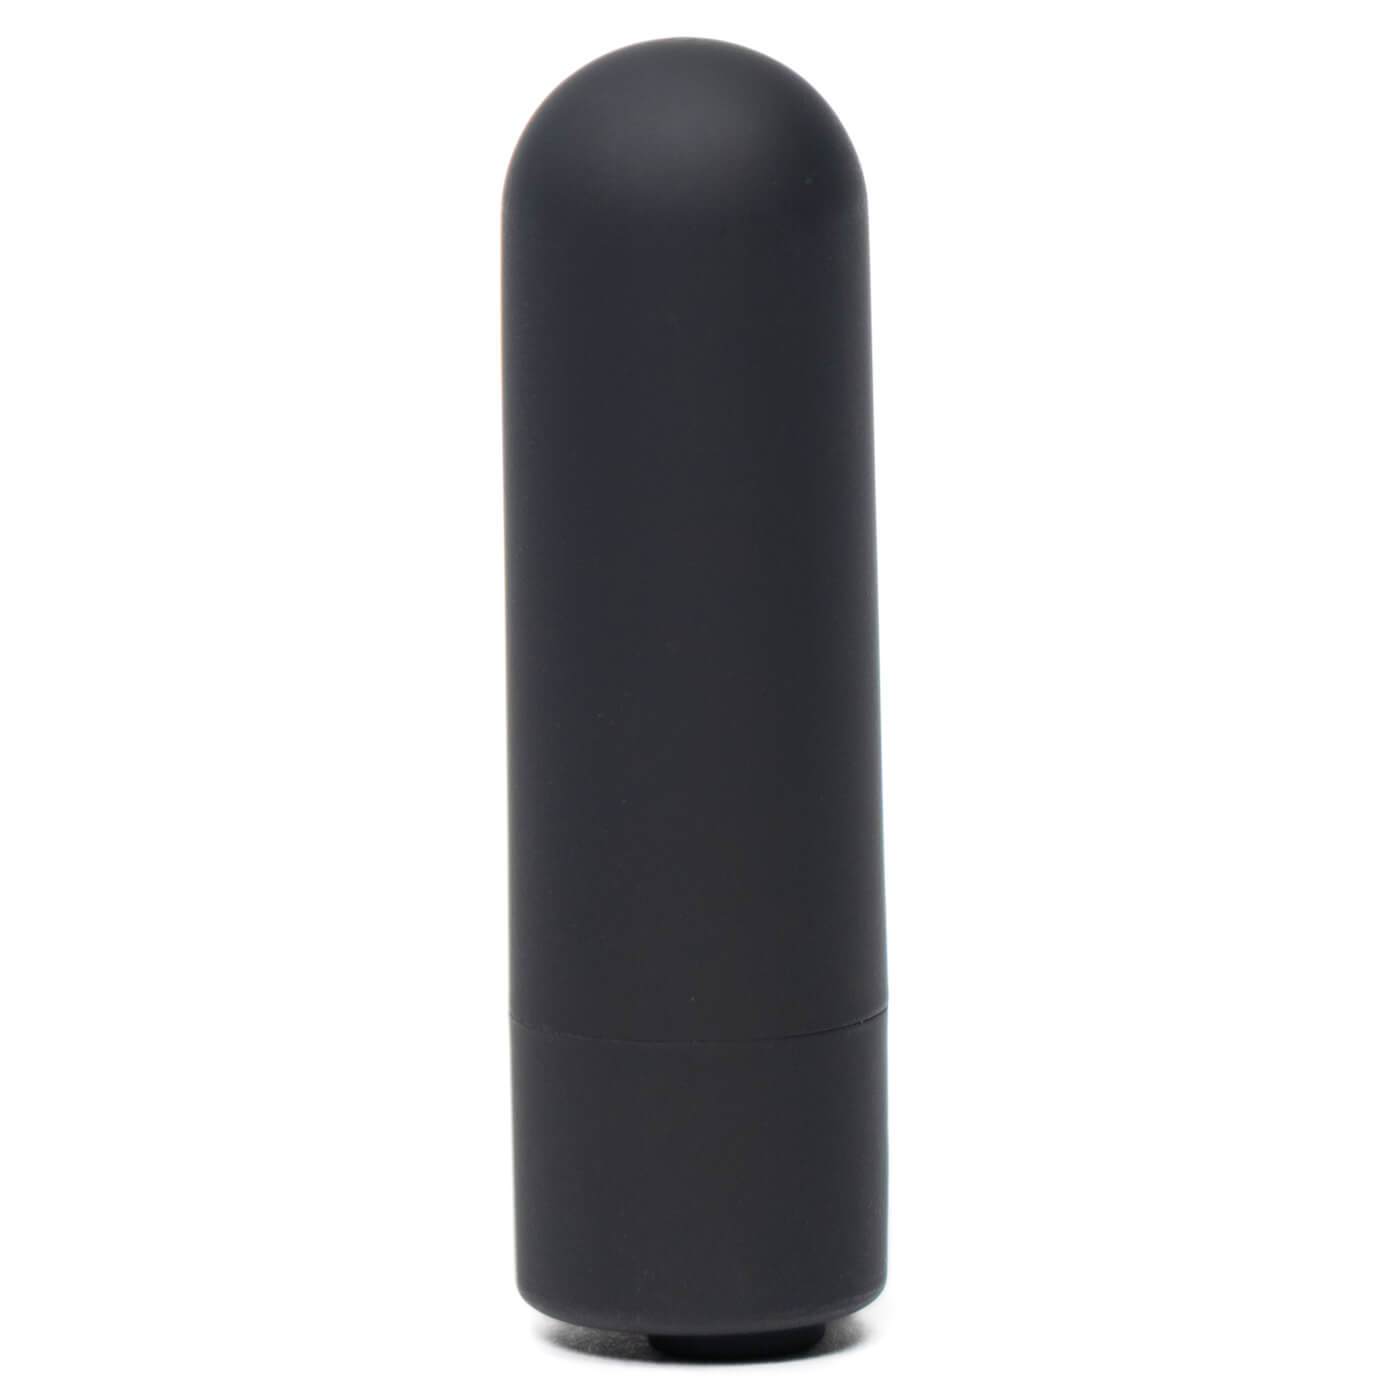 PLAY 10 Function Ultra Powerful Discreet Rechargeable Bullet Vibrator